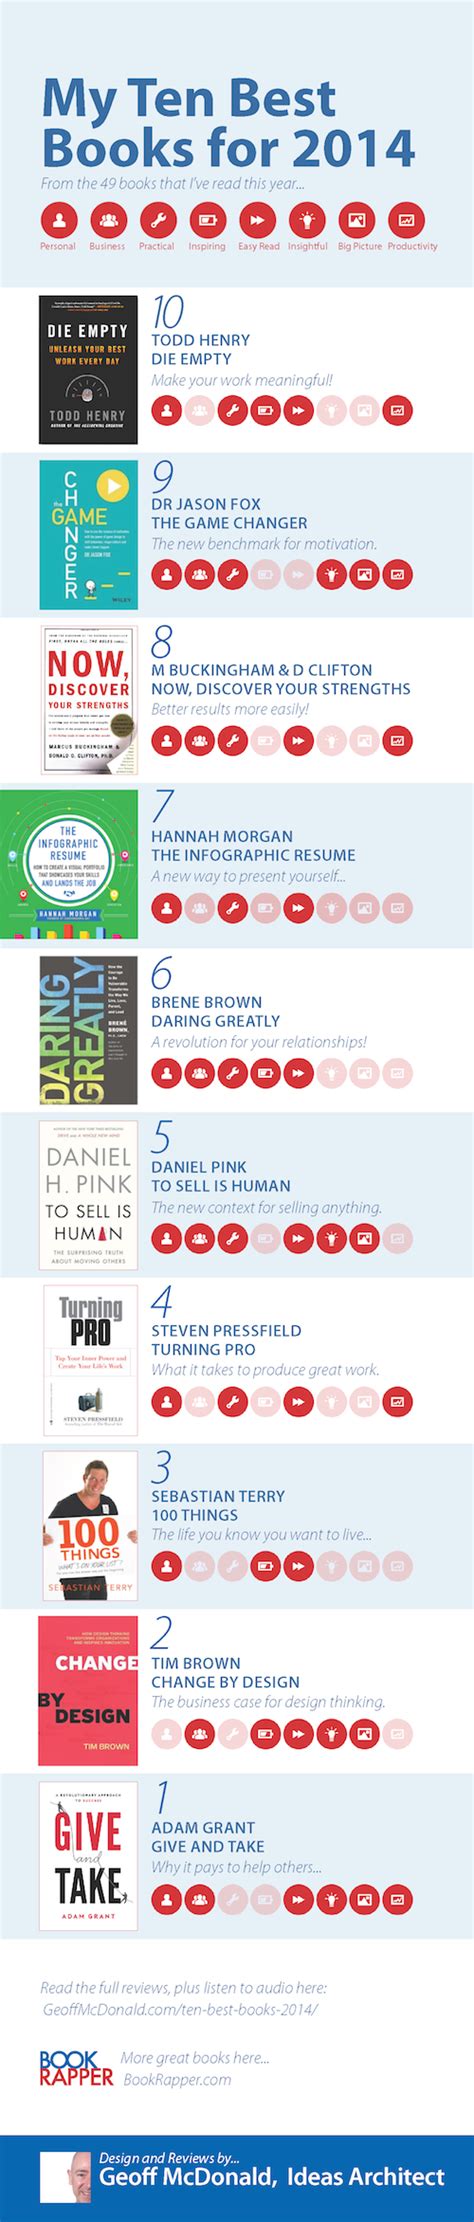 Best Books Of 2014 Infographic